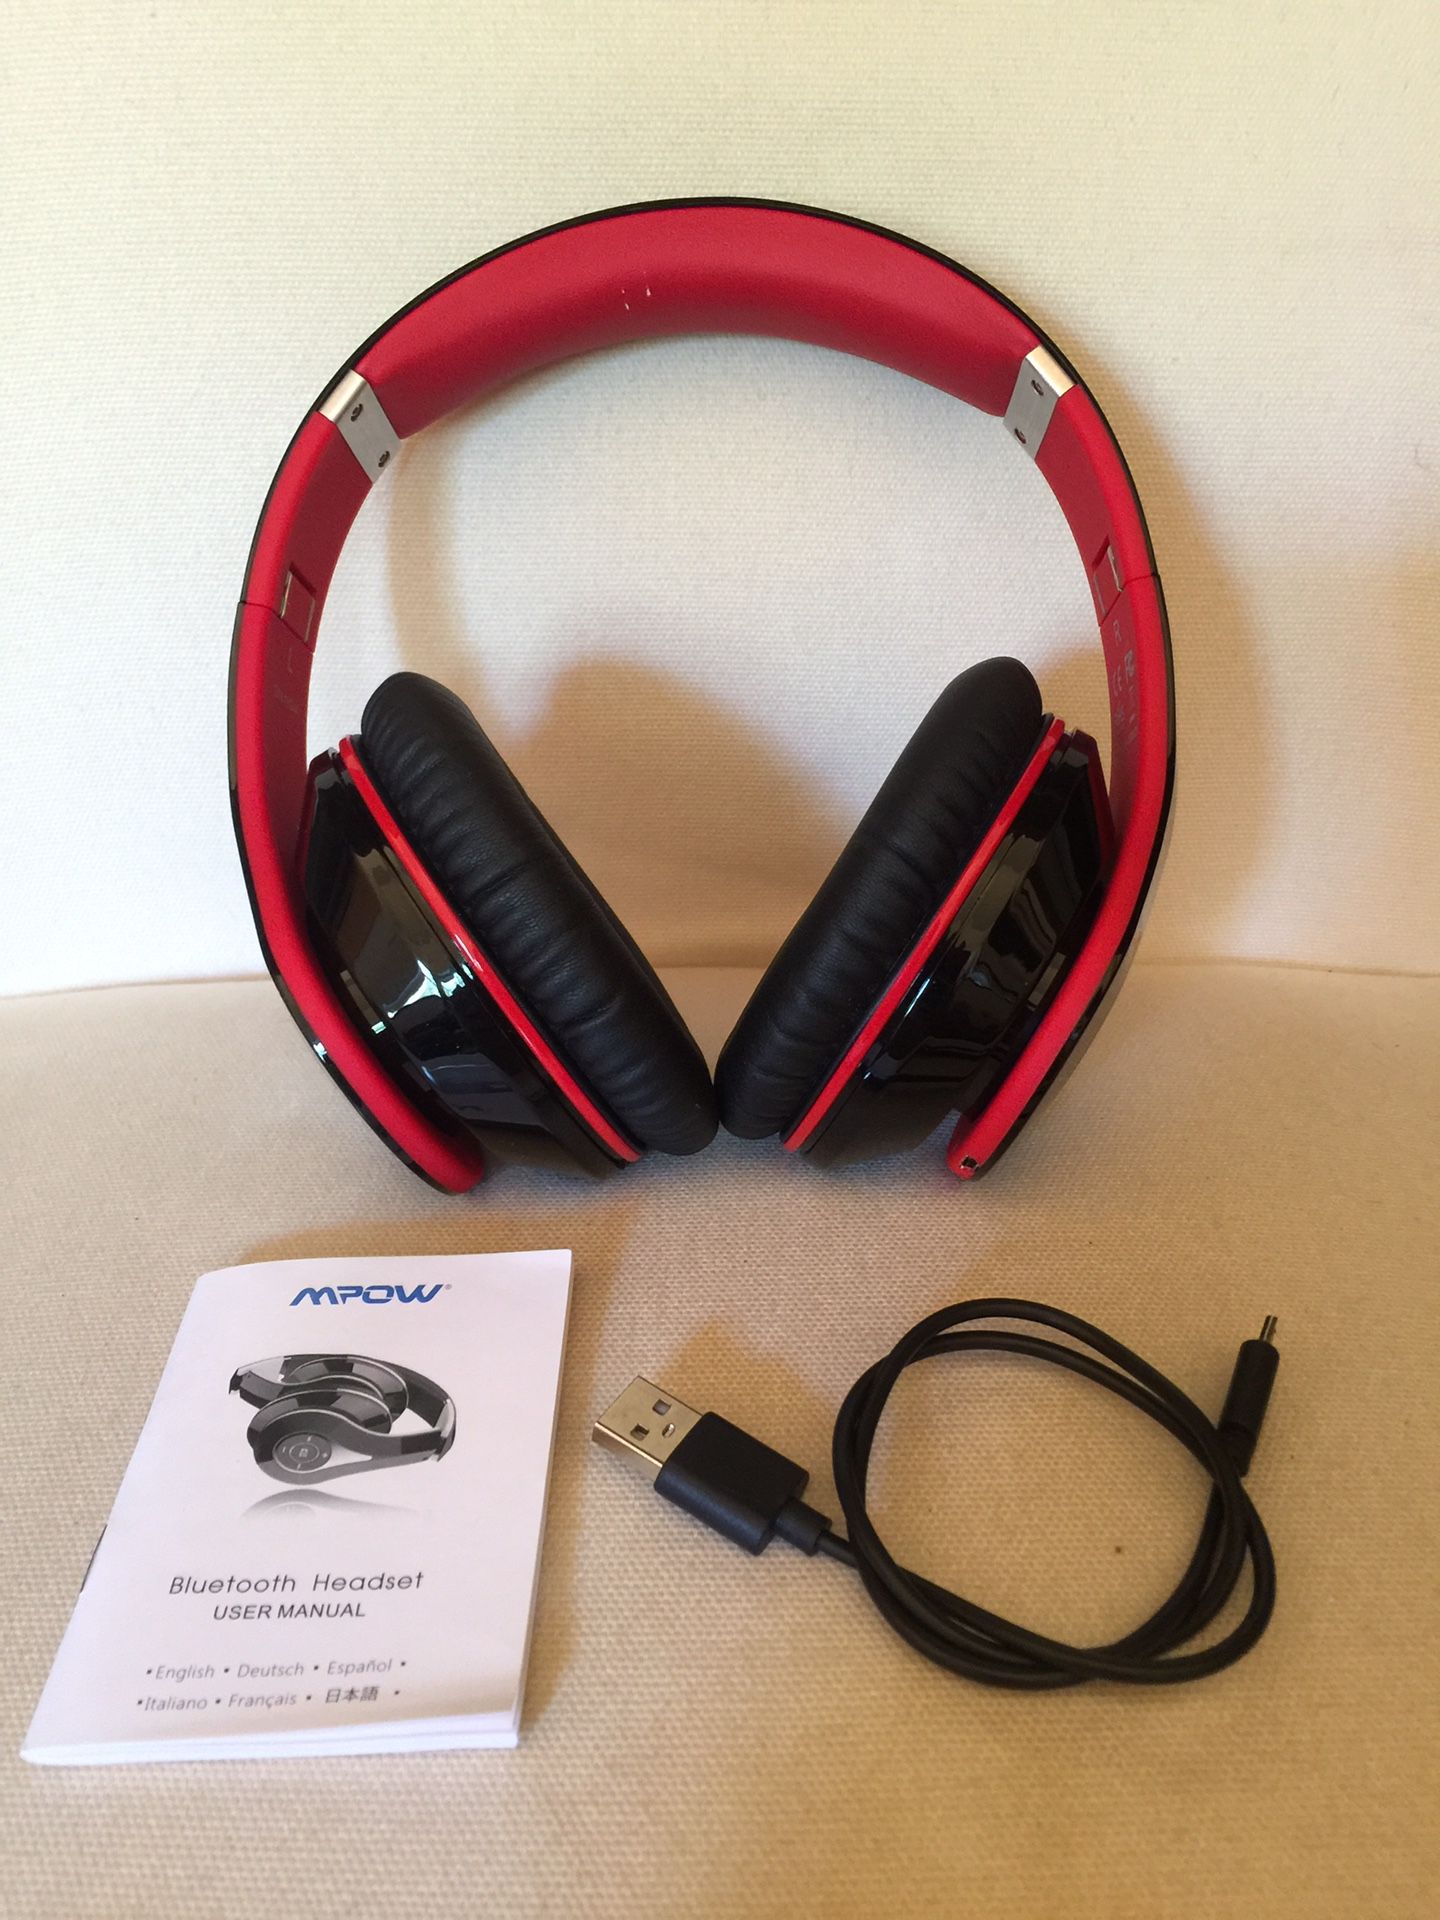 Mpow foldable bluetooth headset BH059A New never used